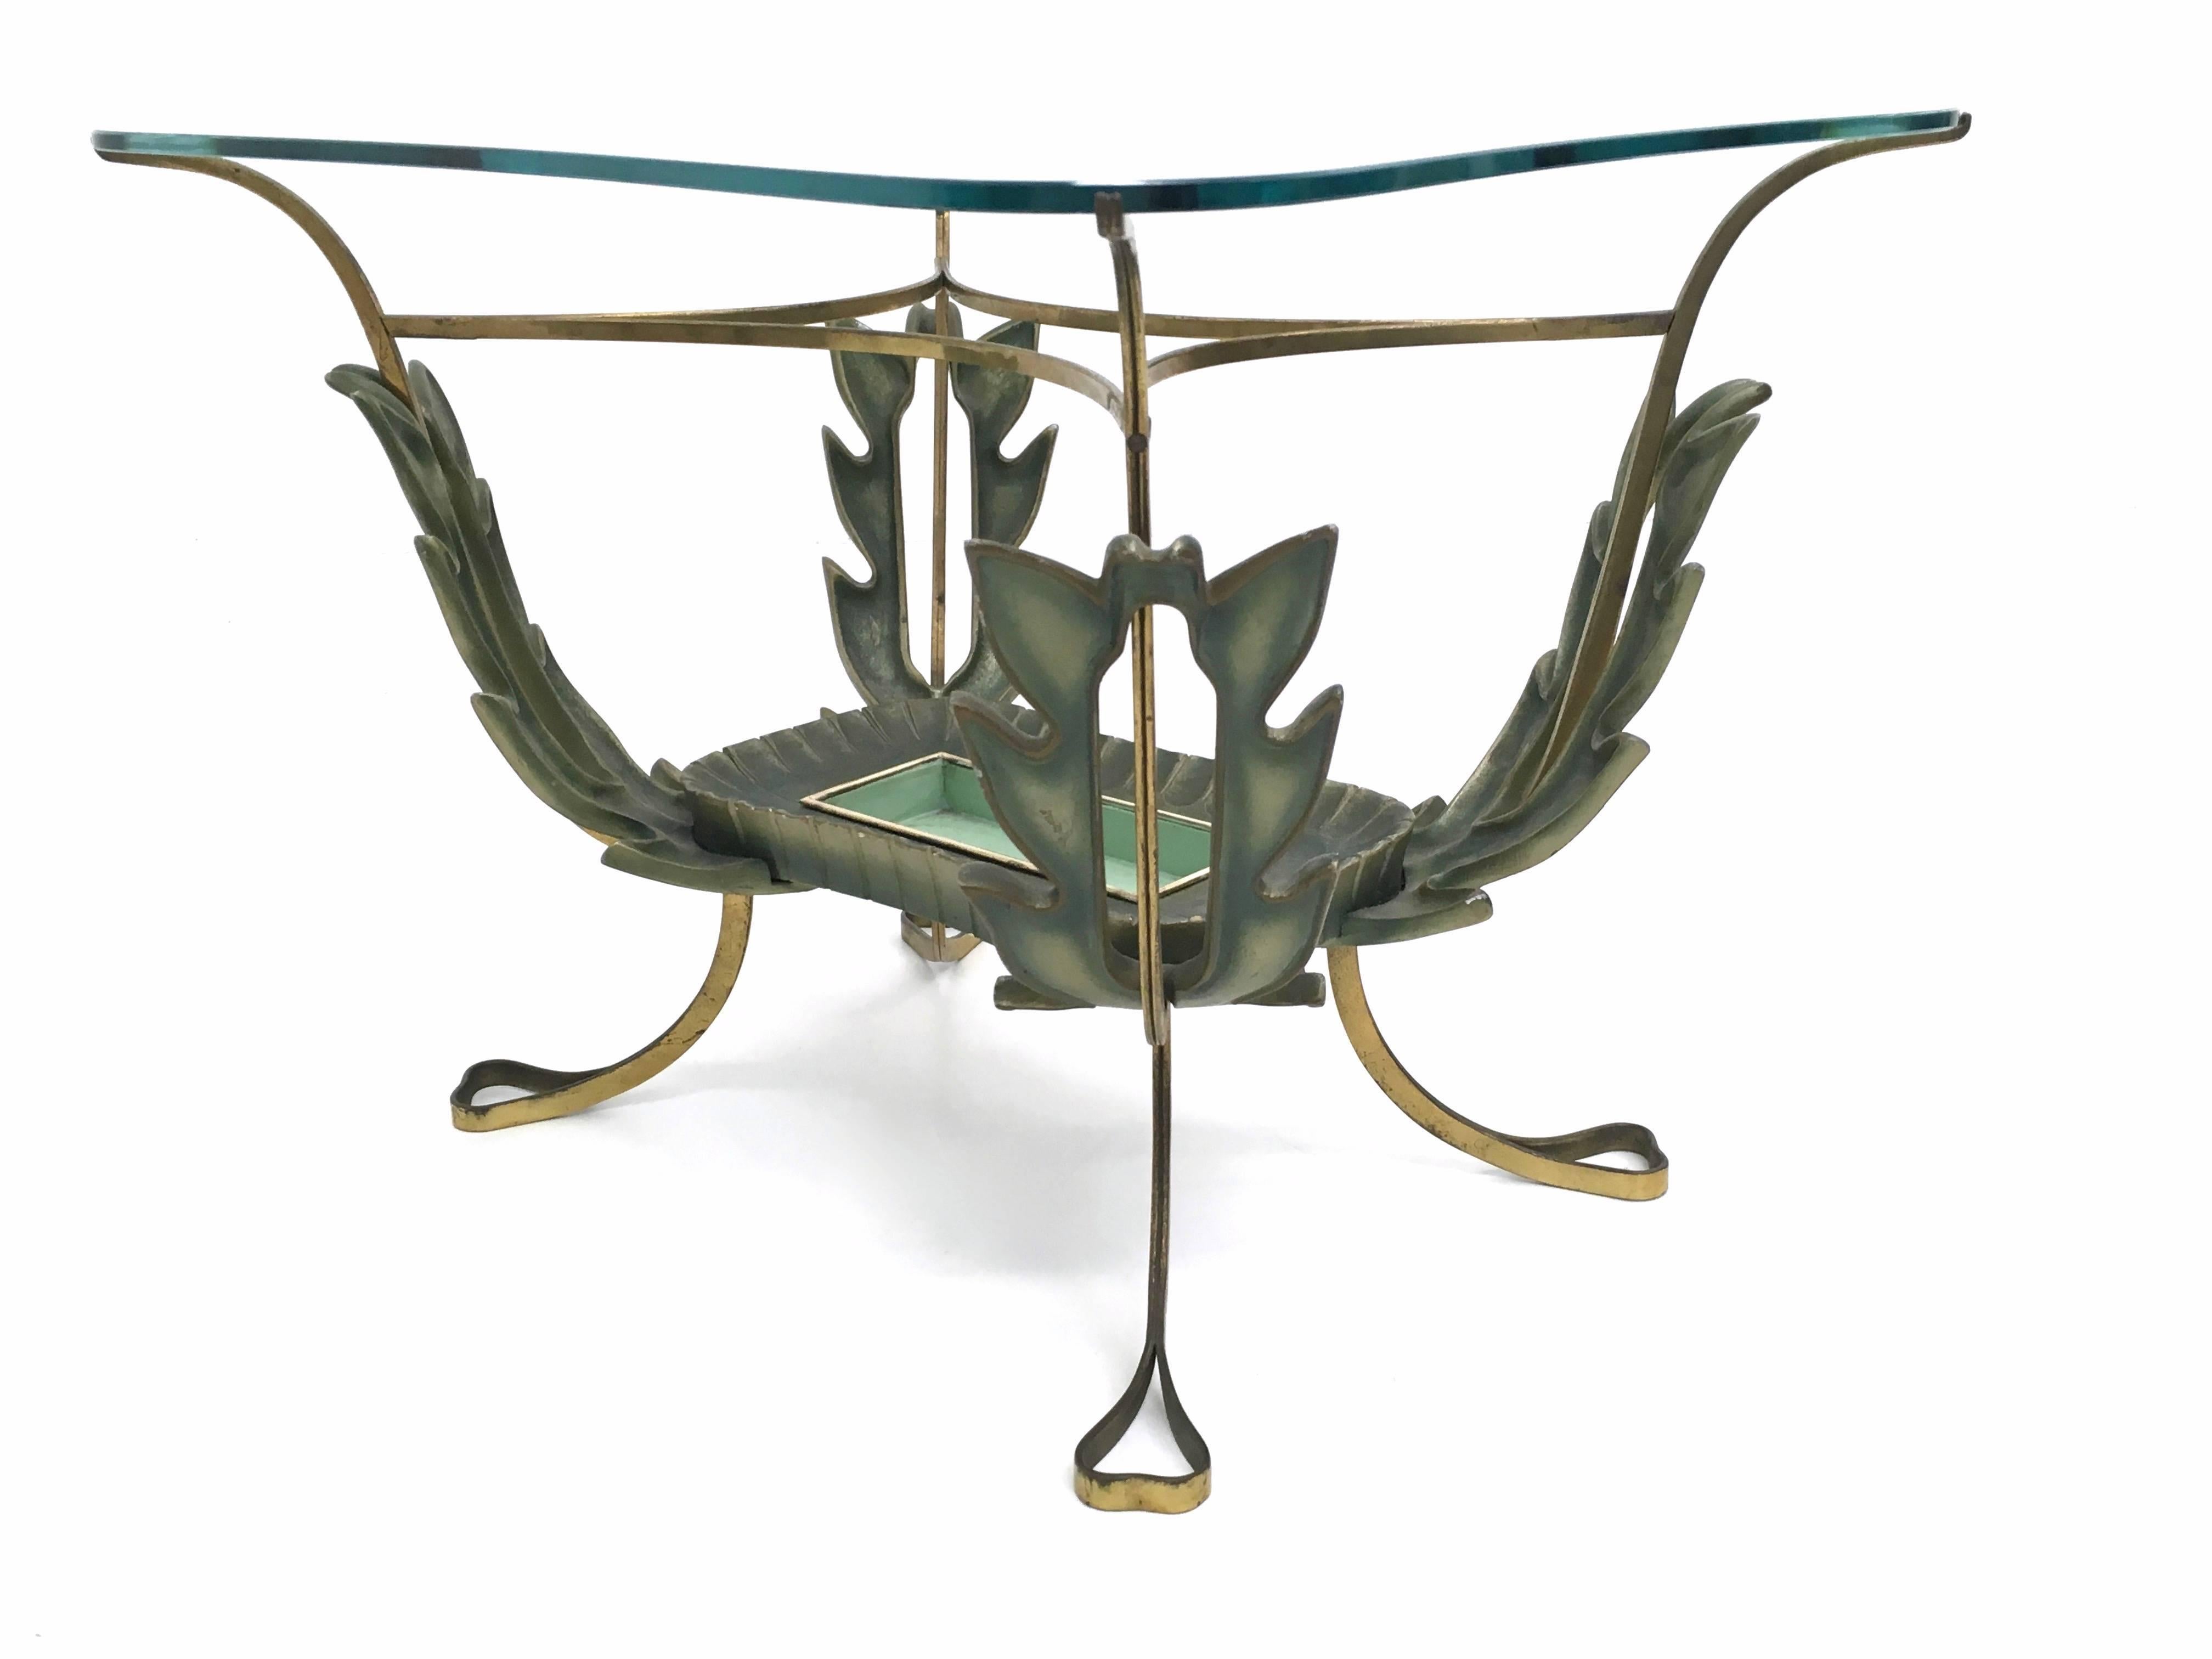 Vintage Brass and Varnished Metal Coffee Table by Pierluigi Colli, Italy In Good Condition For Sale In Bresso, Lombardy